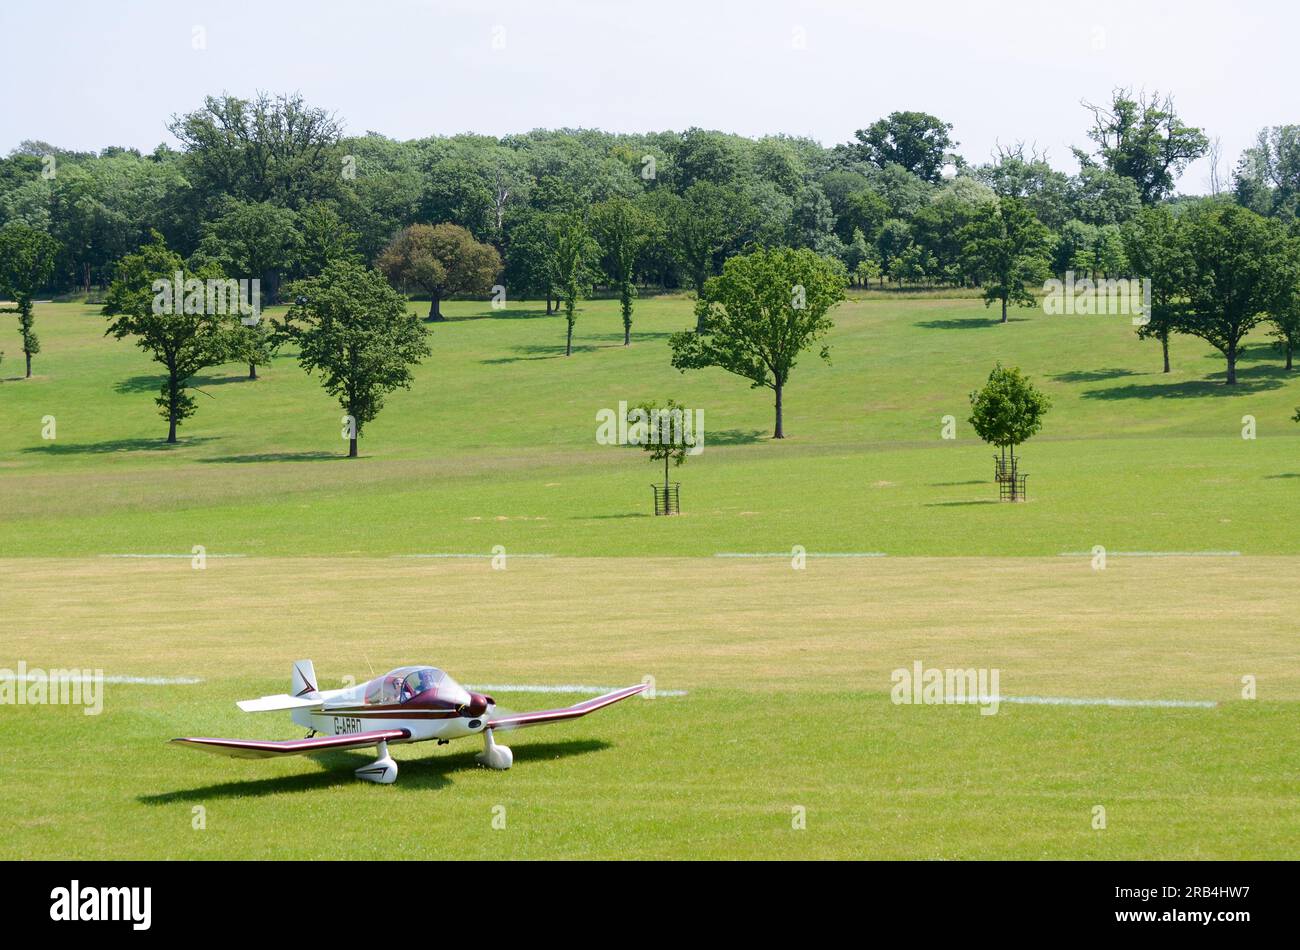 SAN Jodel DR-1050 Ambassadeur plane taxiing on grass airstrip at a wings and wheels event in the countryside at Heveningham Hall. Rural country Stock Photo